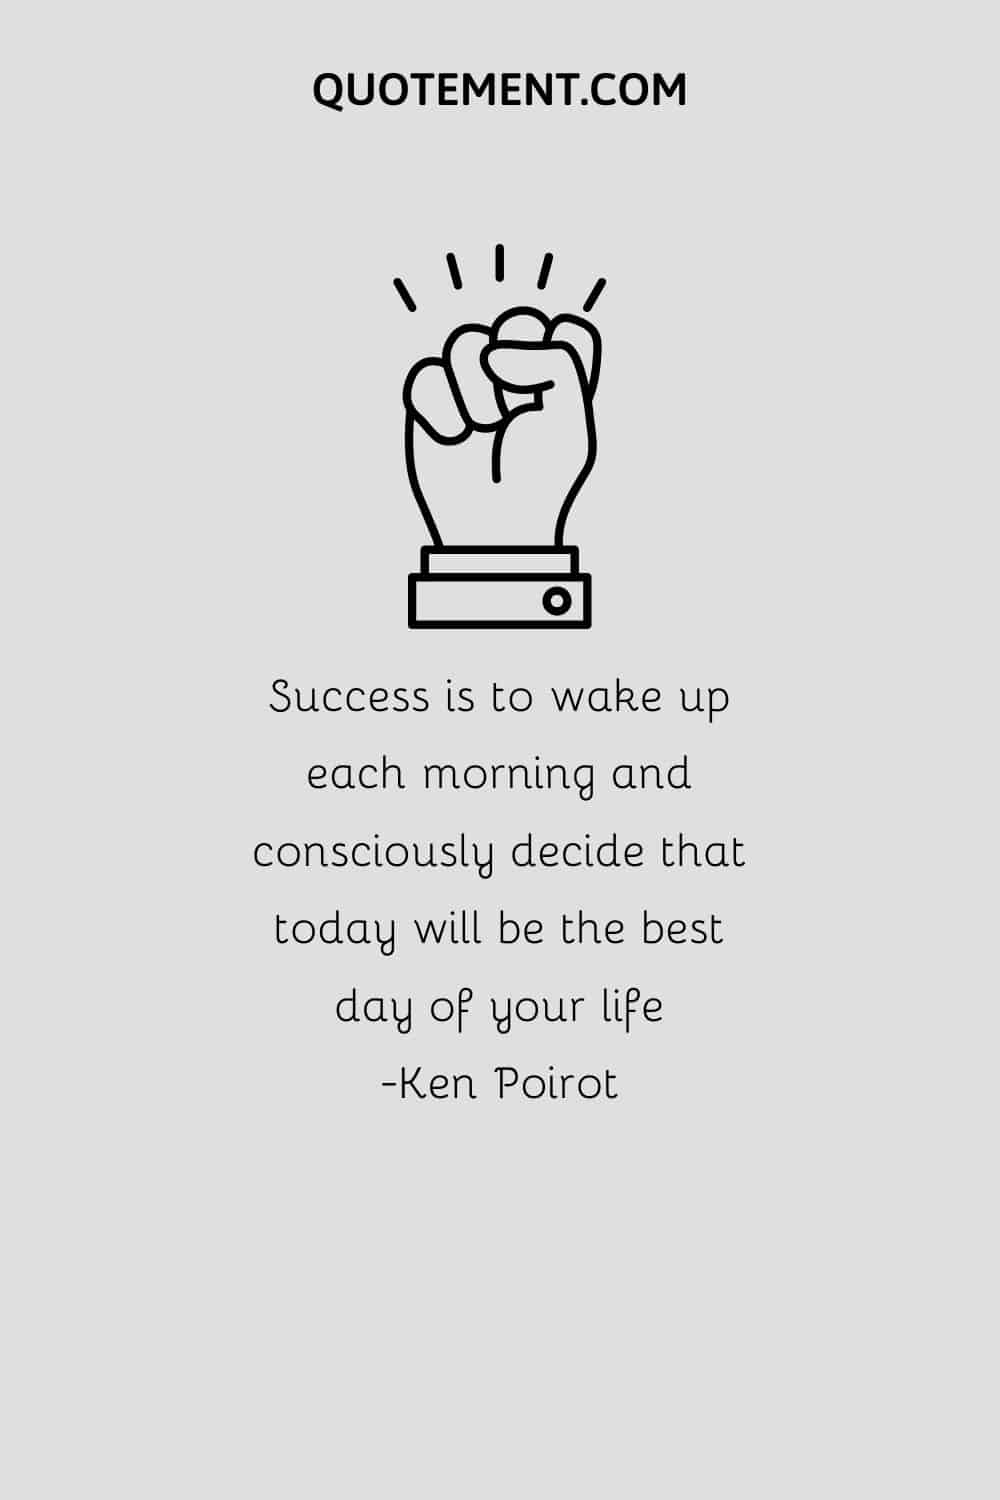 Success is to wake up each morning and consciously decide that today will be the best day of your life